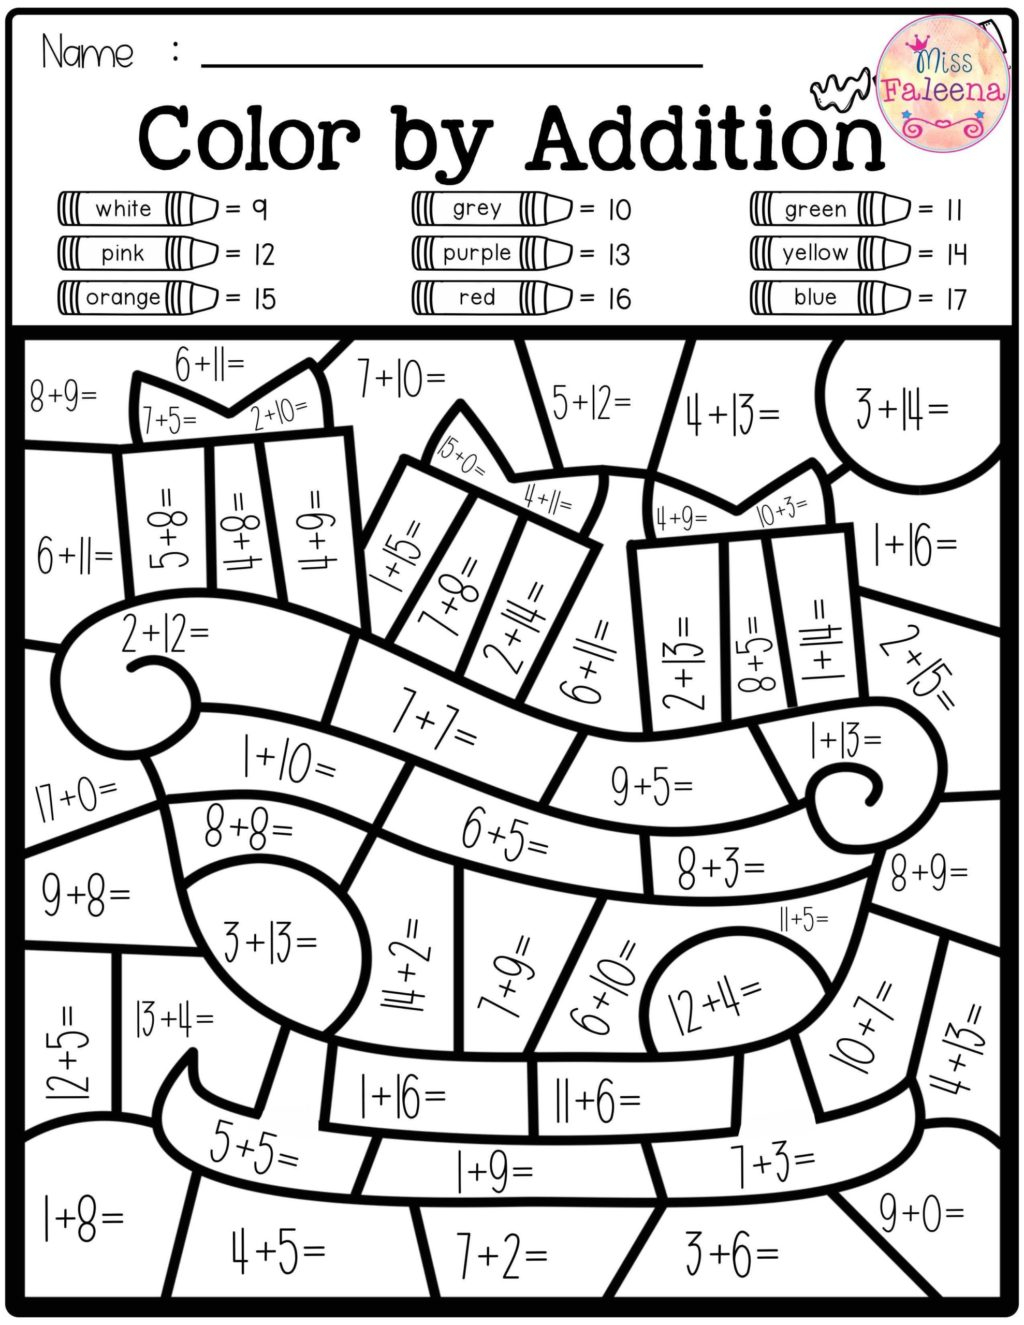 Worksheet ~ Free Colorcode Math Number Addition